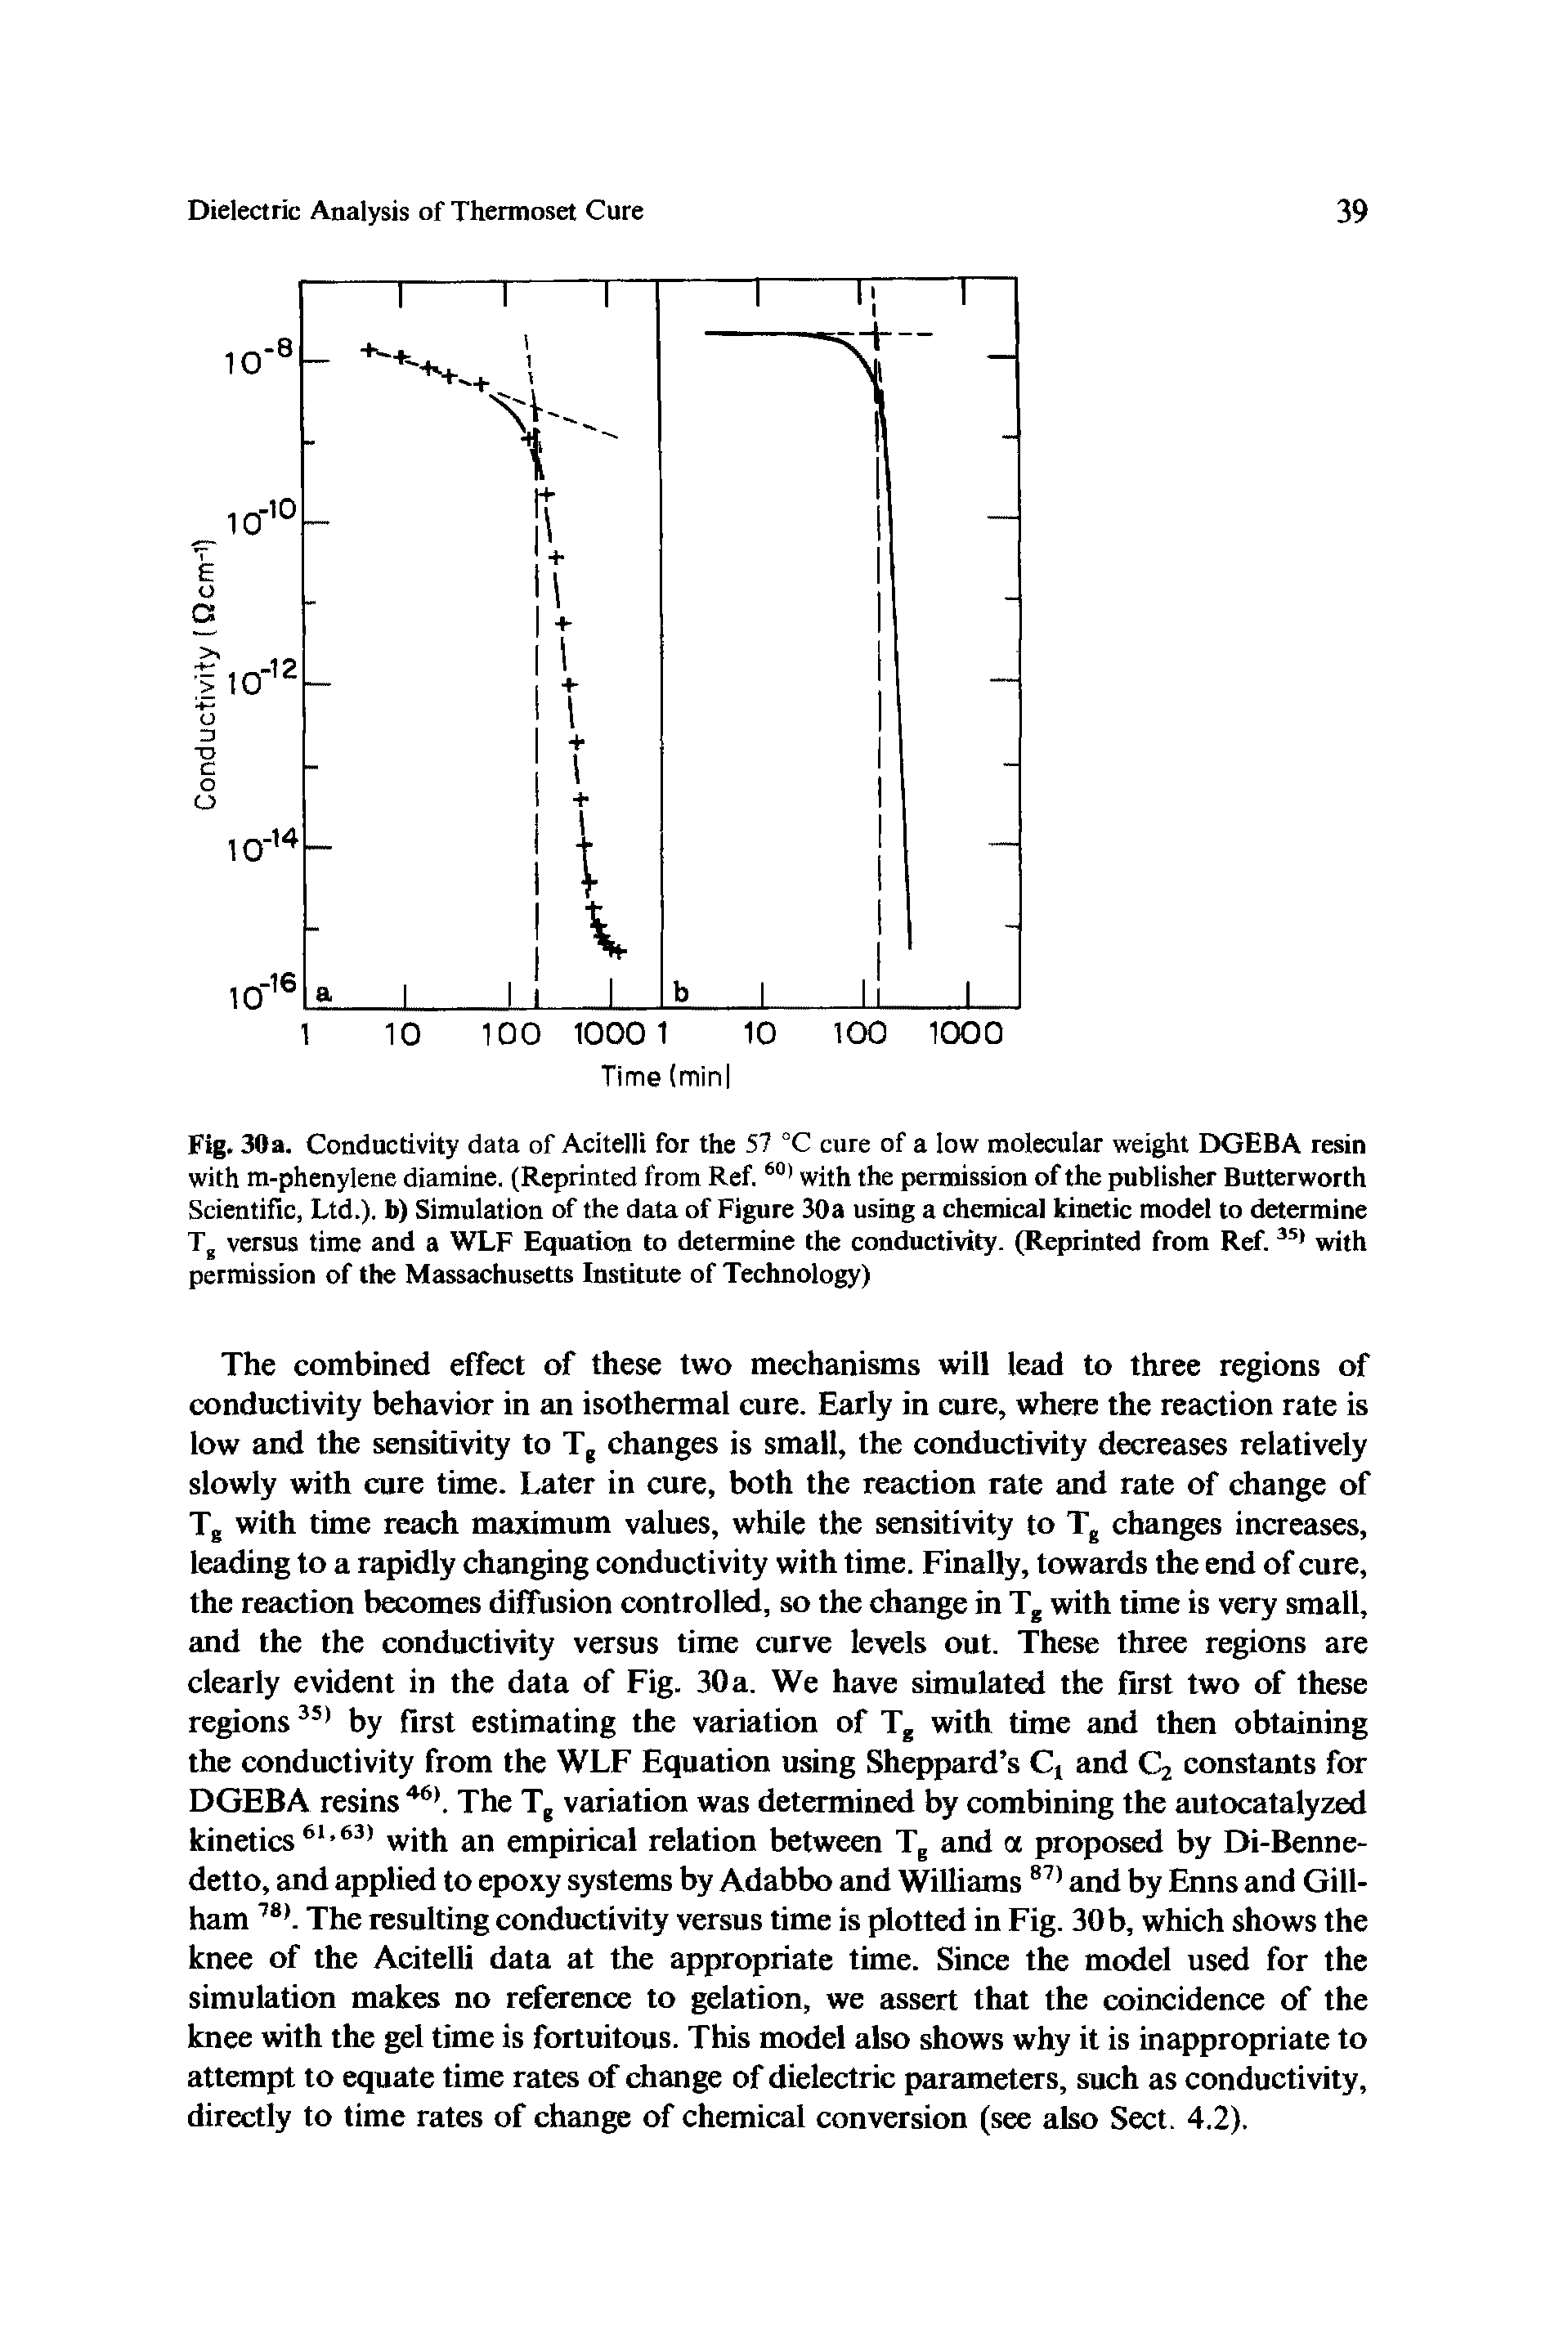 Fig. 30a. Conductivity data of Acitelli for the 57 °C cure of a low molecular weight DGEBA resin with m-phenylene diamine. (Reprinted from Ref. 60) with the permission of the publisher Butterworth Scientific, Ltd.), b) Simulation of the data of Figure 30a using a chemical kinetic model to determine Tg versus time and a WLF Equation to determine the conductivity. (Reprinted from Ref. 35) with permission of the Massachusetts Institute of Technology)...